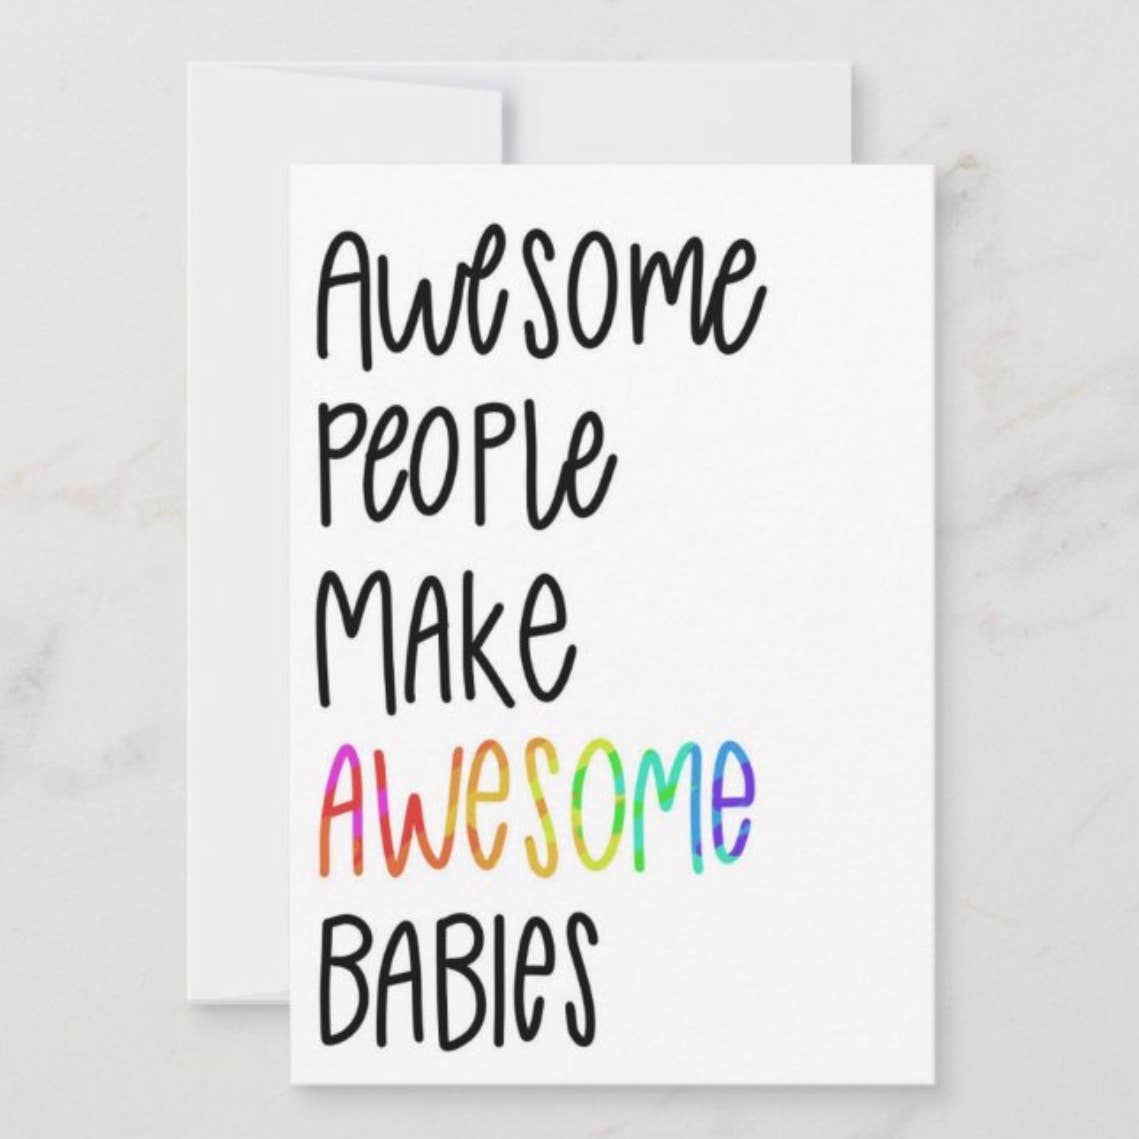 Awesome Babies